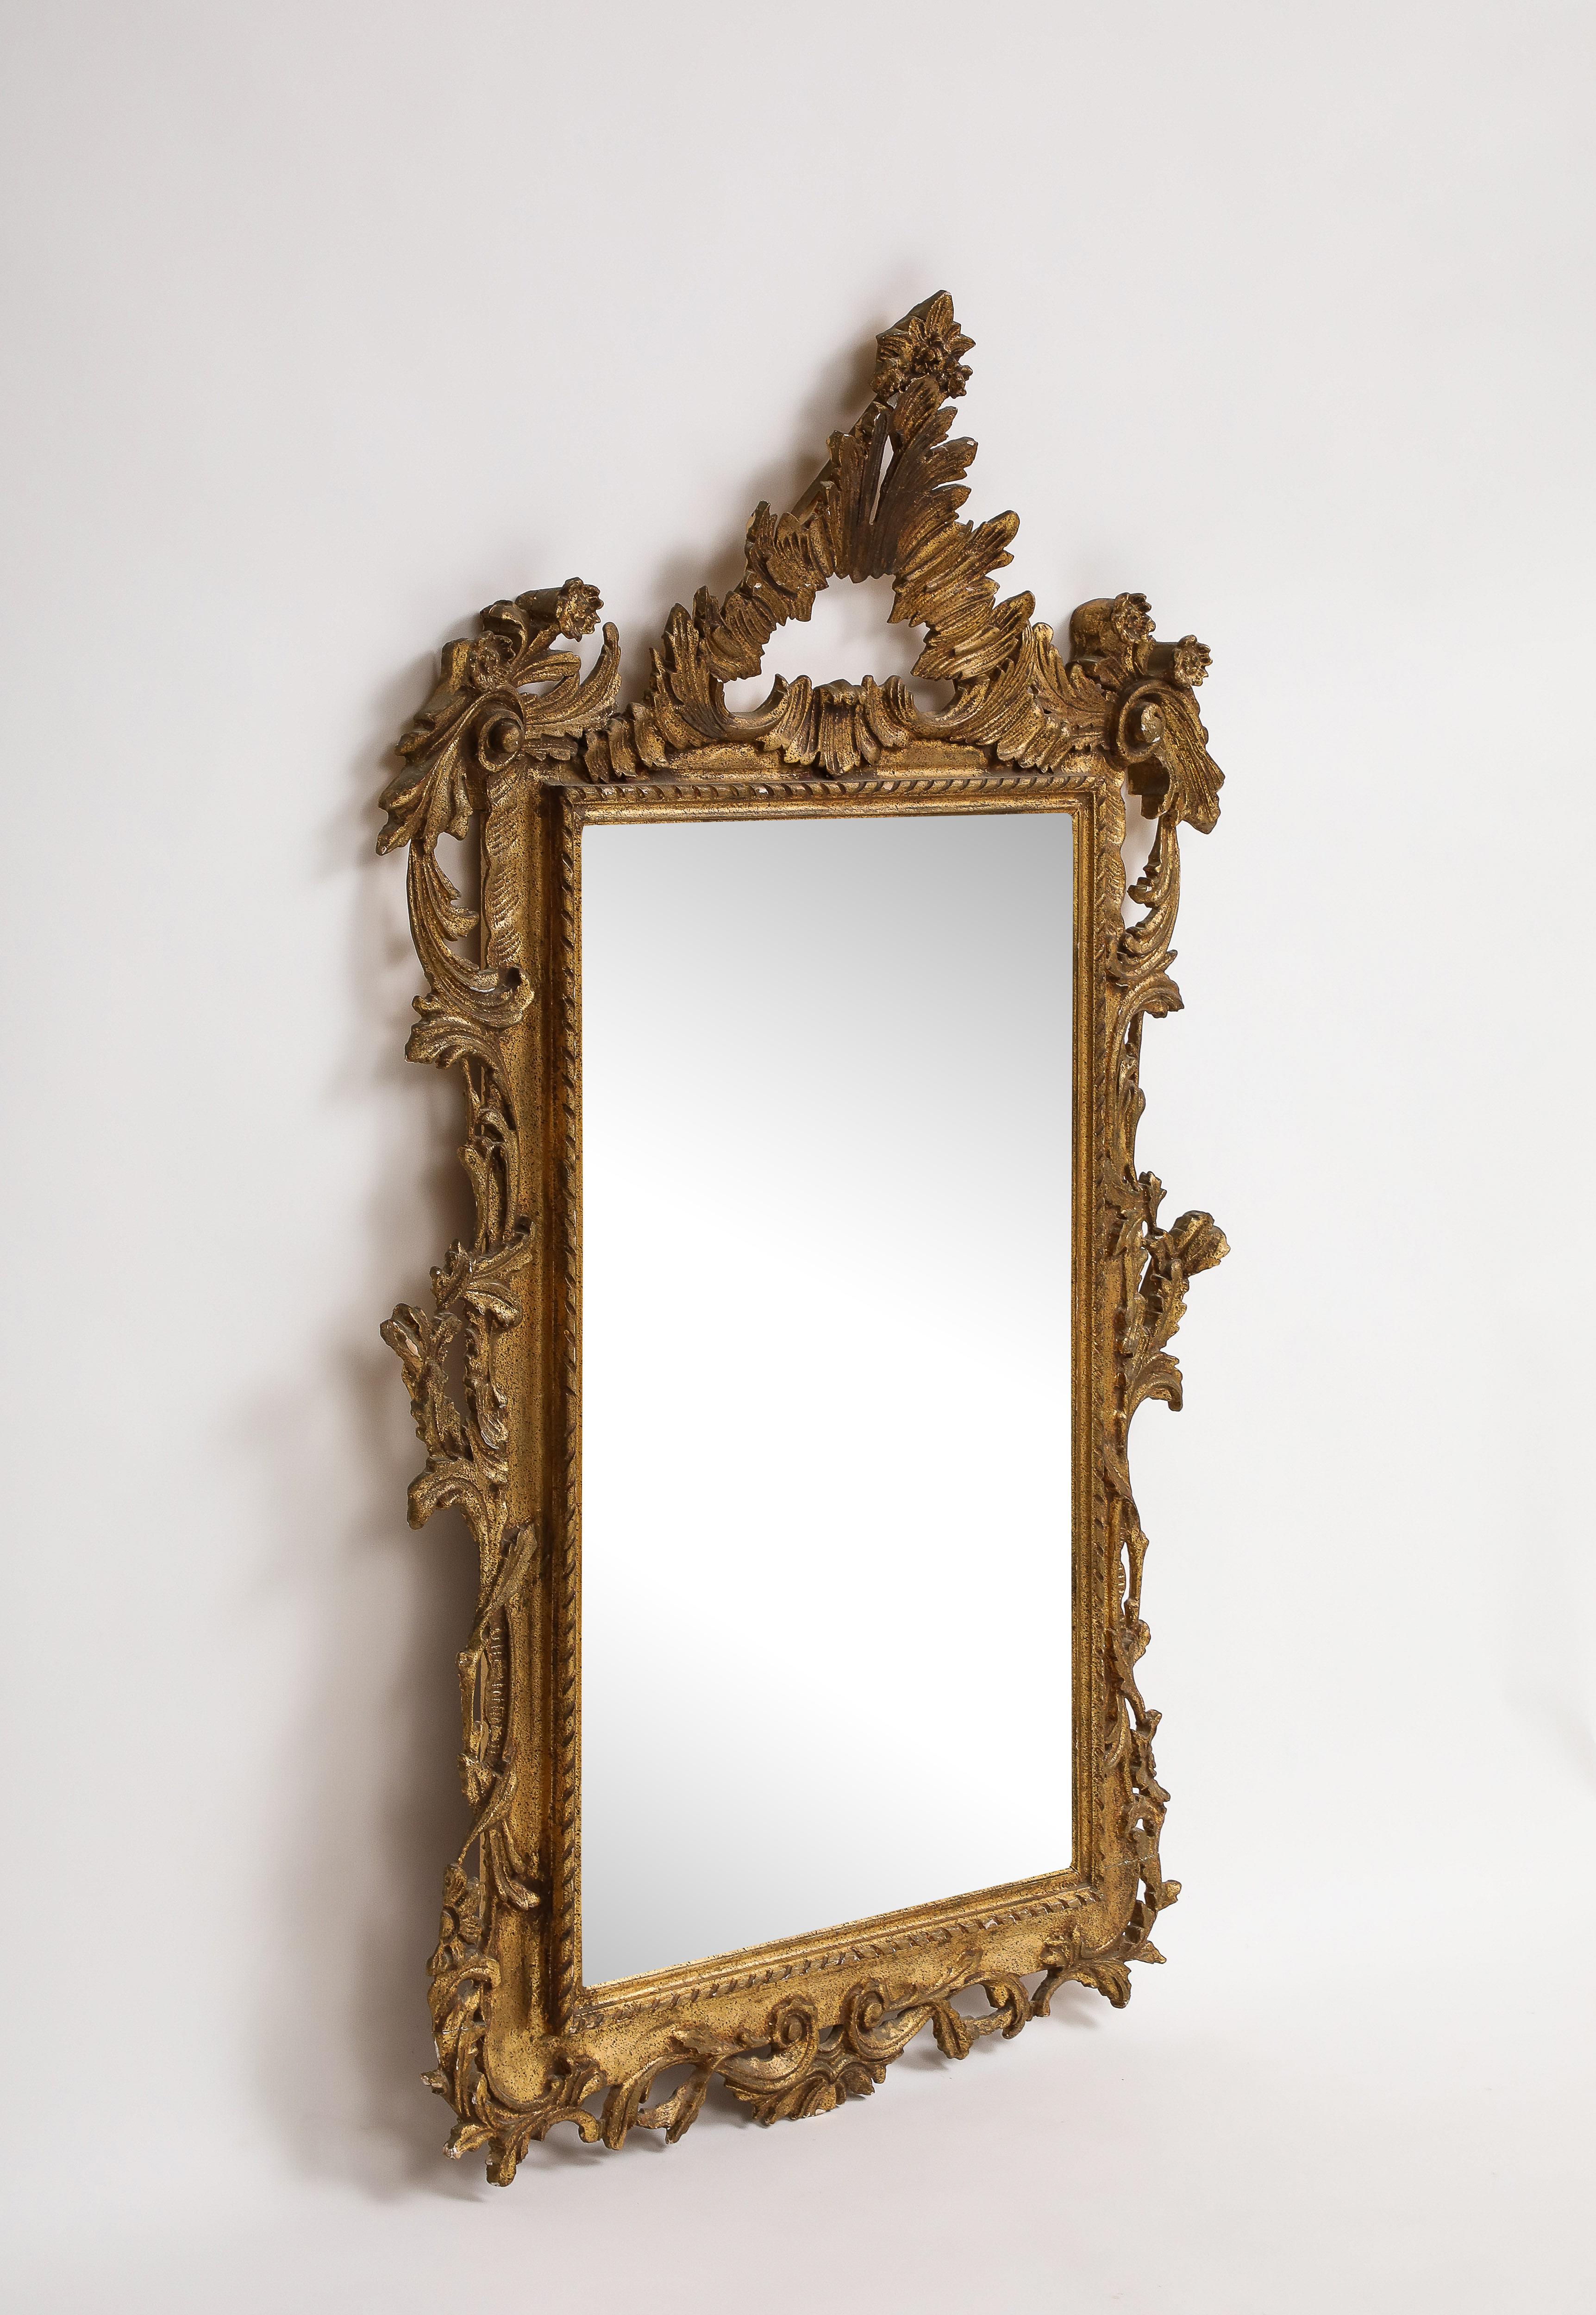 Midcentury Italian Carved Rococo Style Giltwood Mirror  In Fair Condition For Sale In Chicago, IL